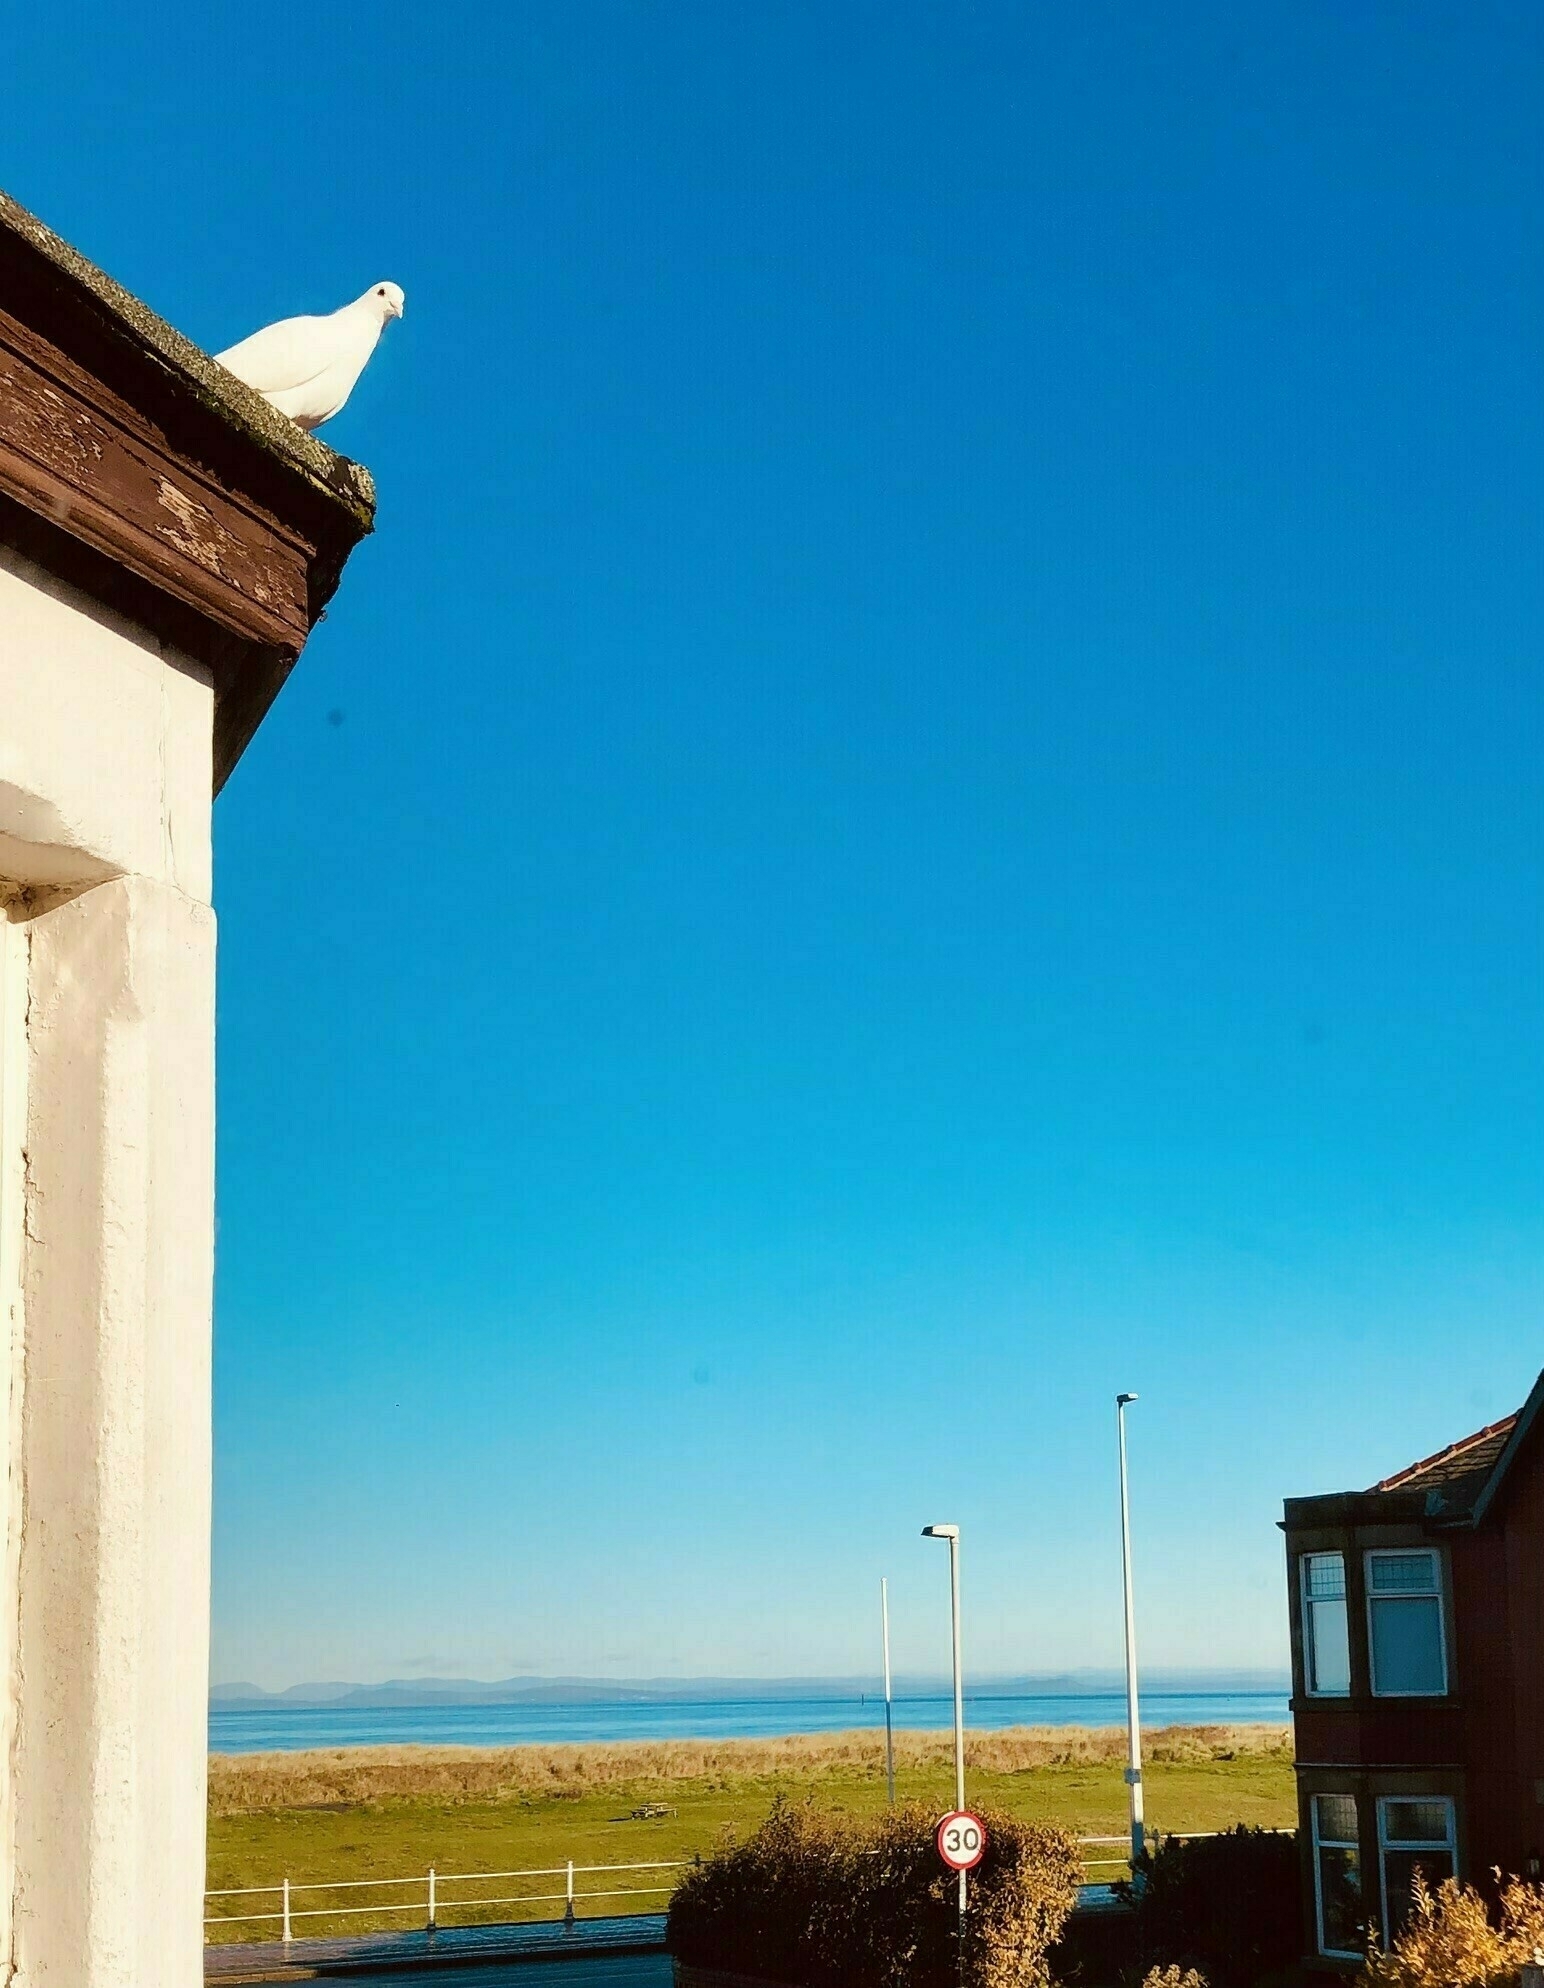 Shot from a window of blue skies, sea in the distance and a white dove perched on the roof of a house